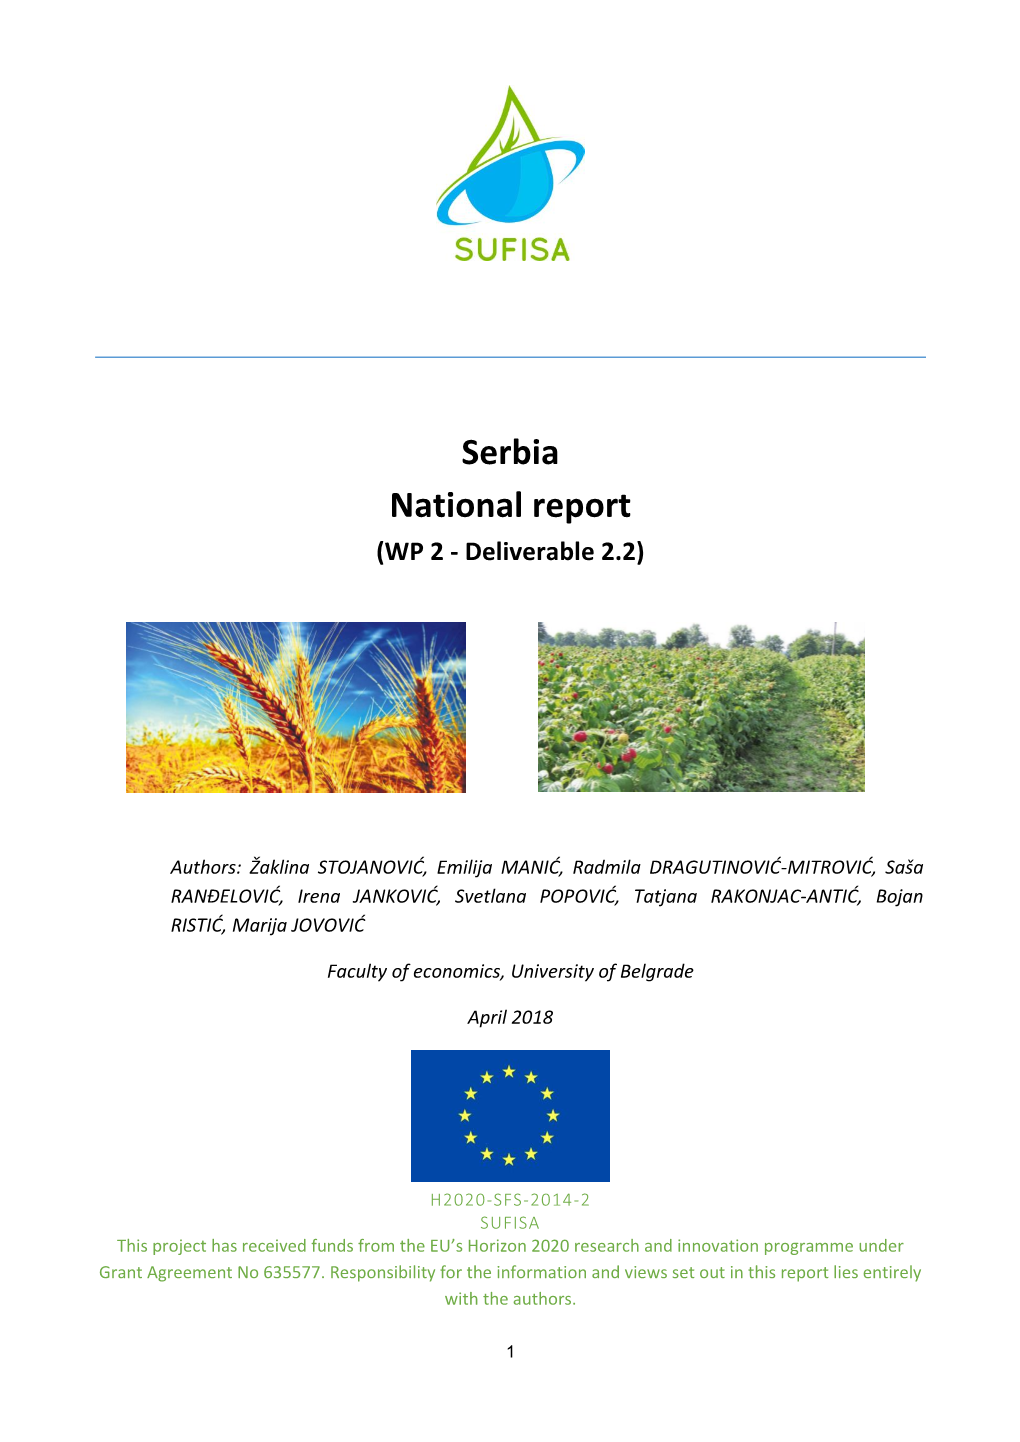 Serbia National Report (WP 2 - Deliverable 2.2)